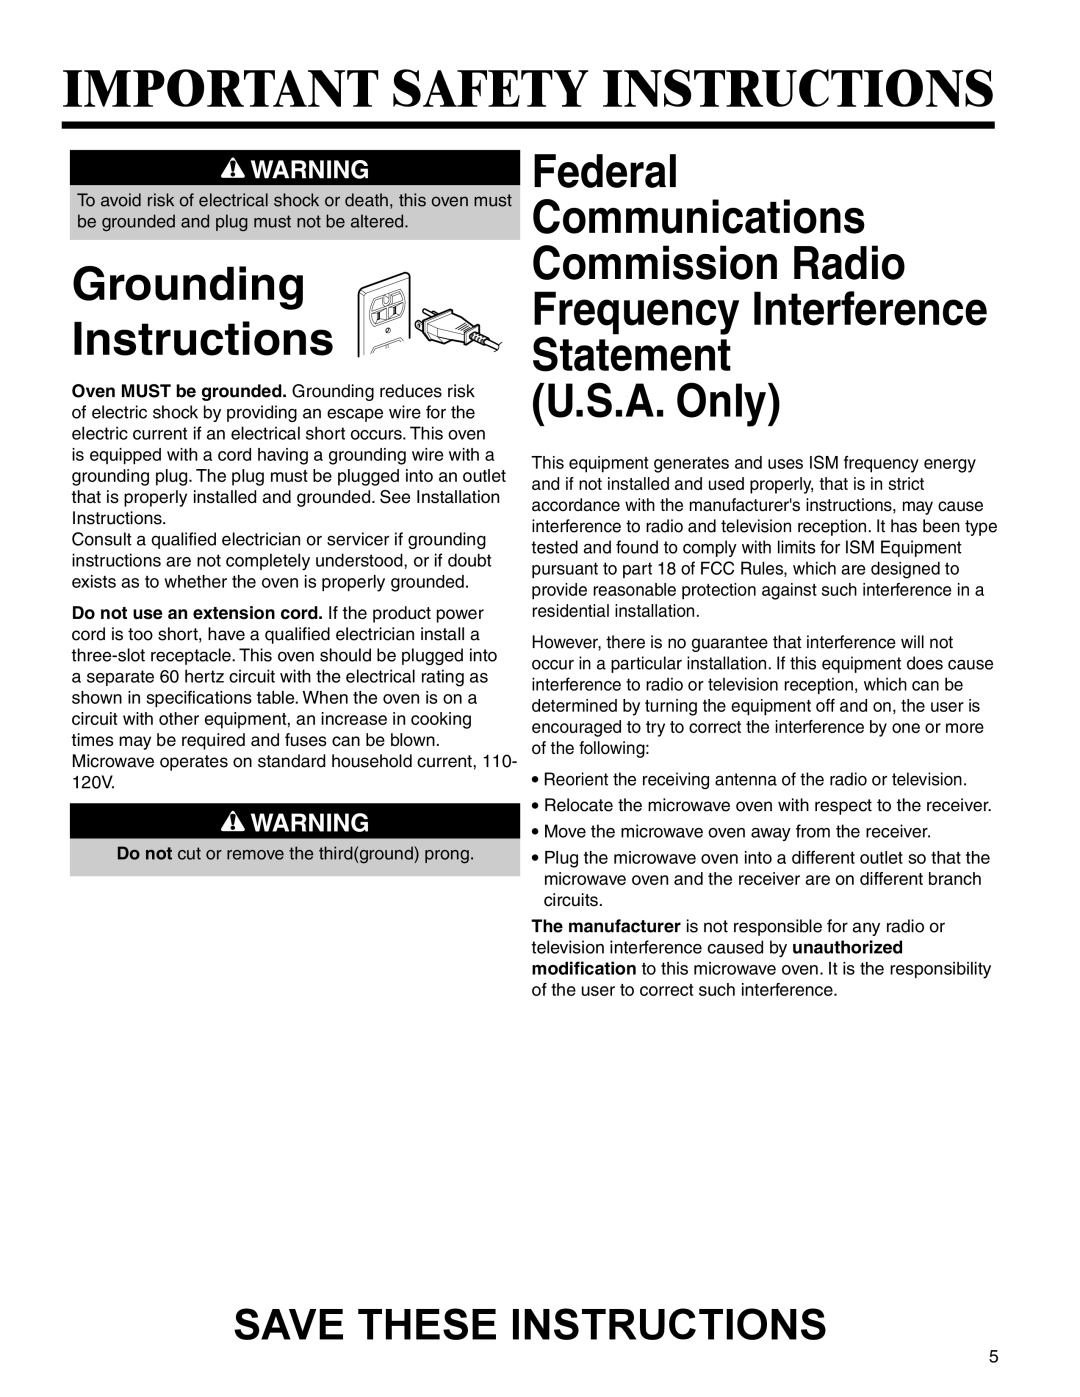 Maytag UMC5200BCB/W/S Grounding Instructions, Federal Communications Commission Radio, Important Safety Instructions 